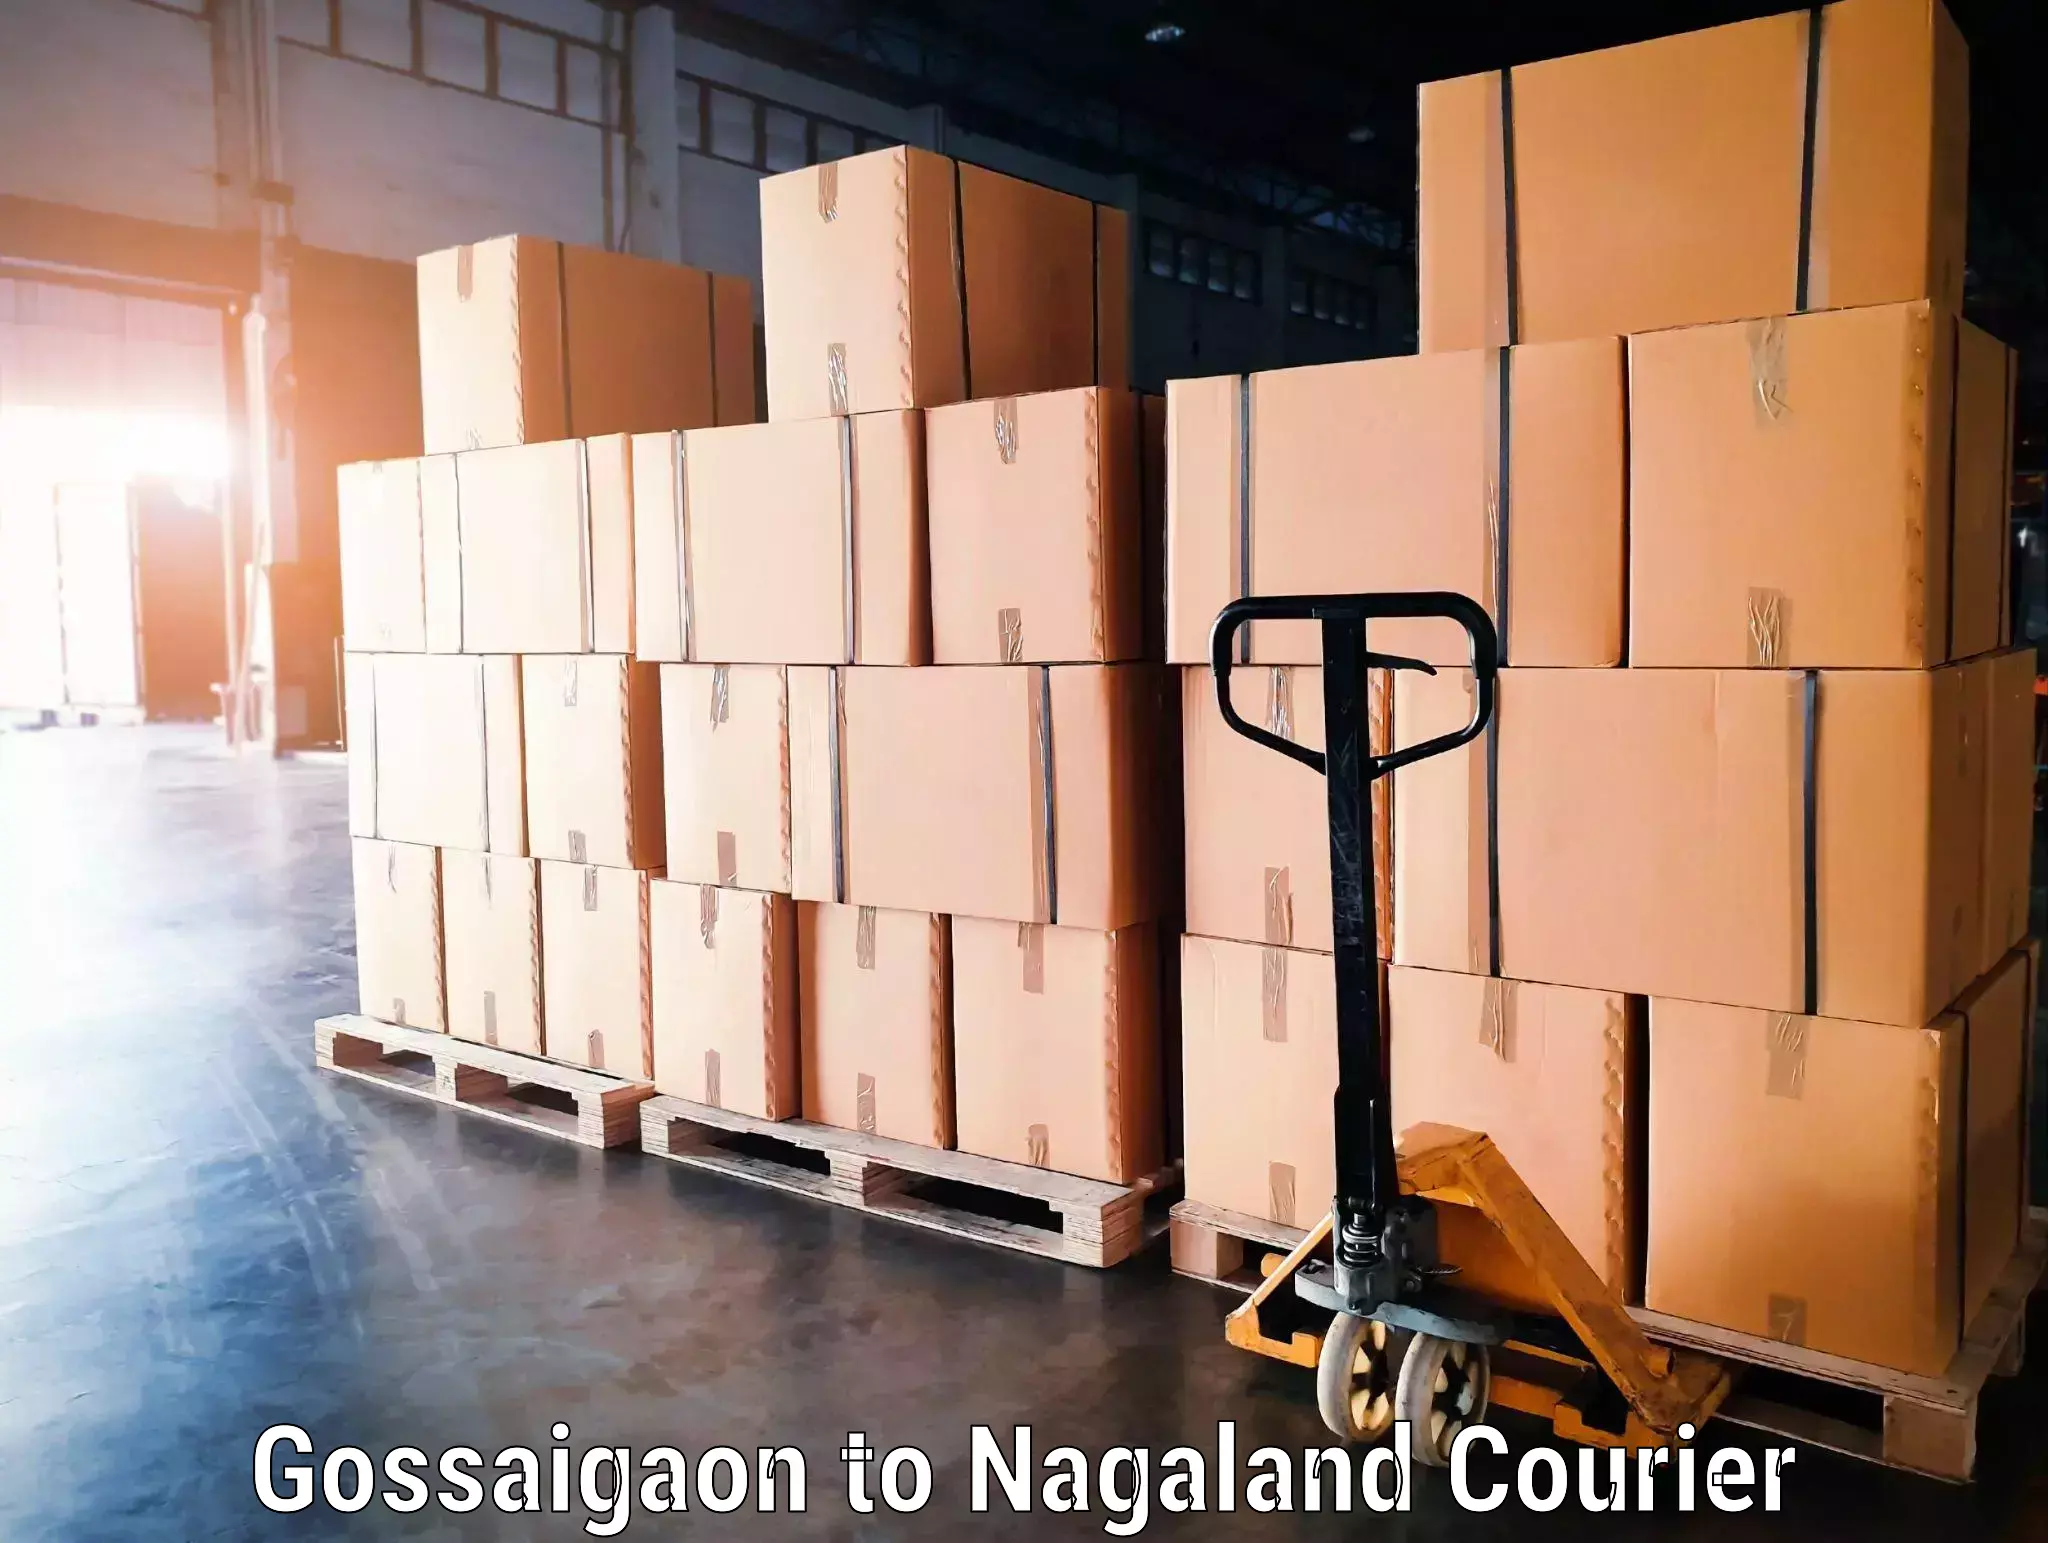 Luggage shipment specialists Gossaigaon to Mon